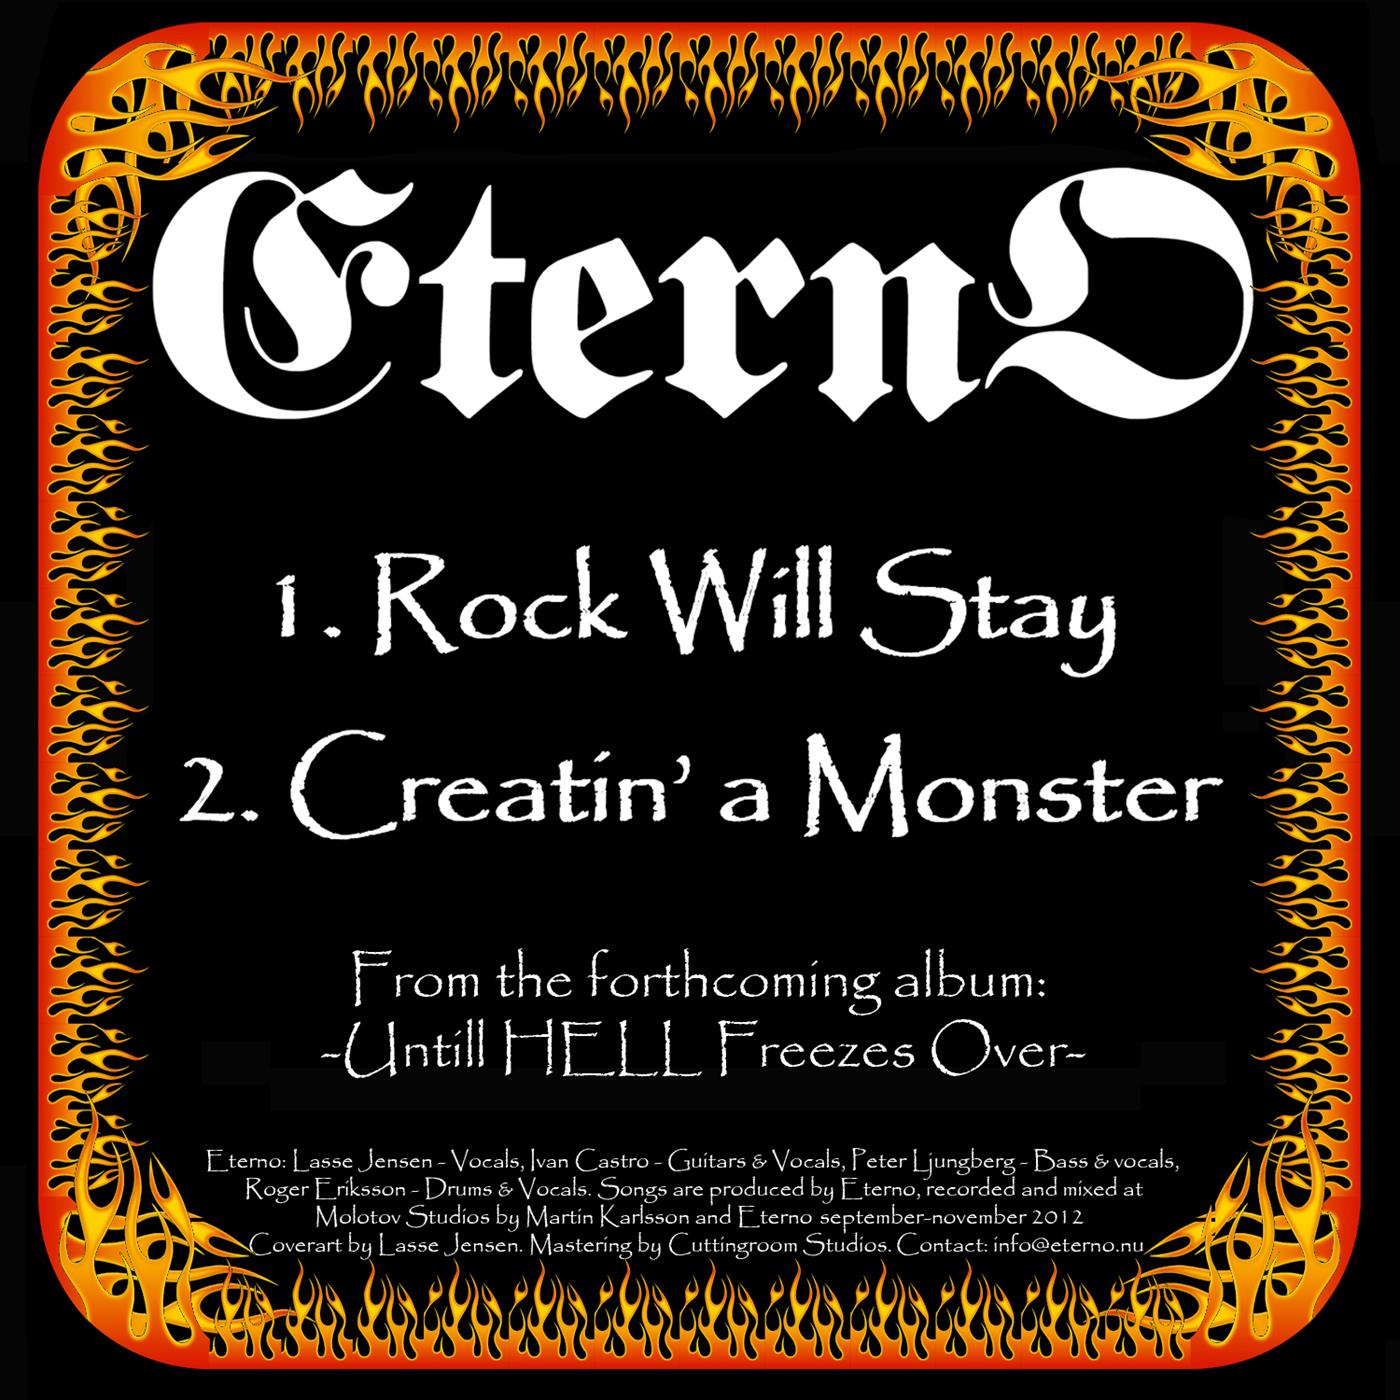 Rock will stay/Creatin a monster